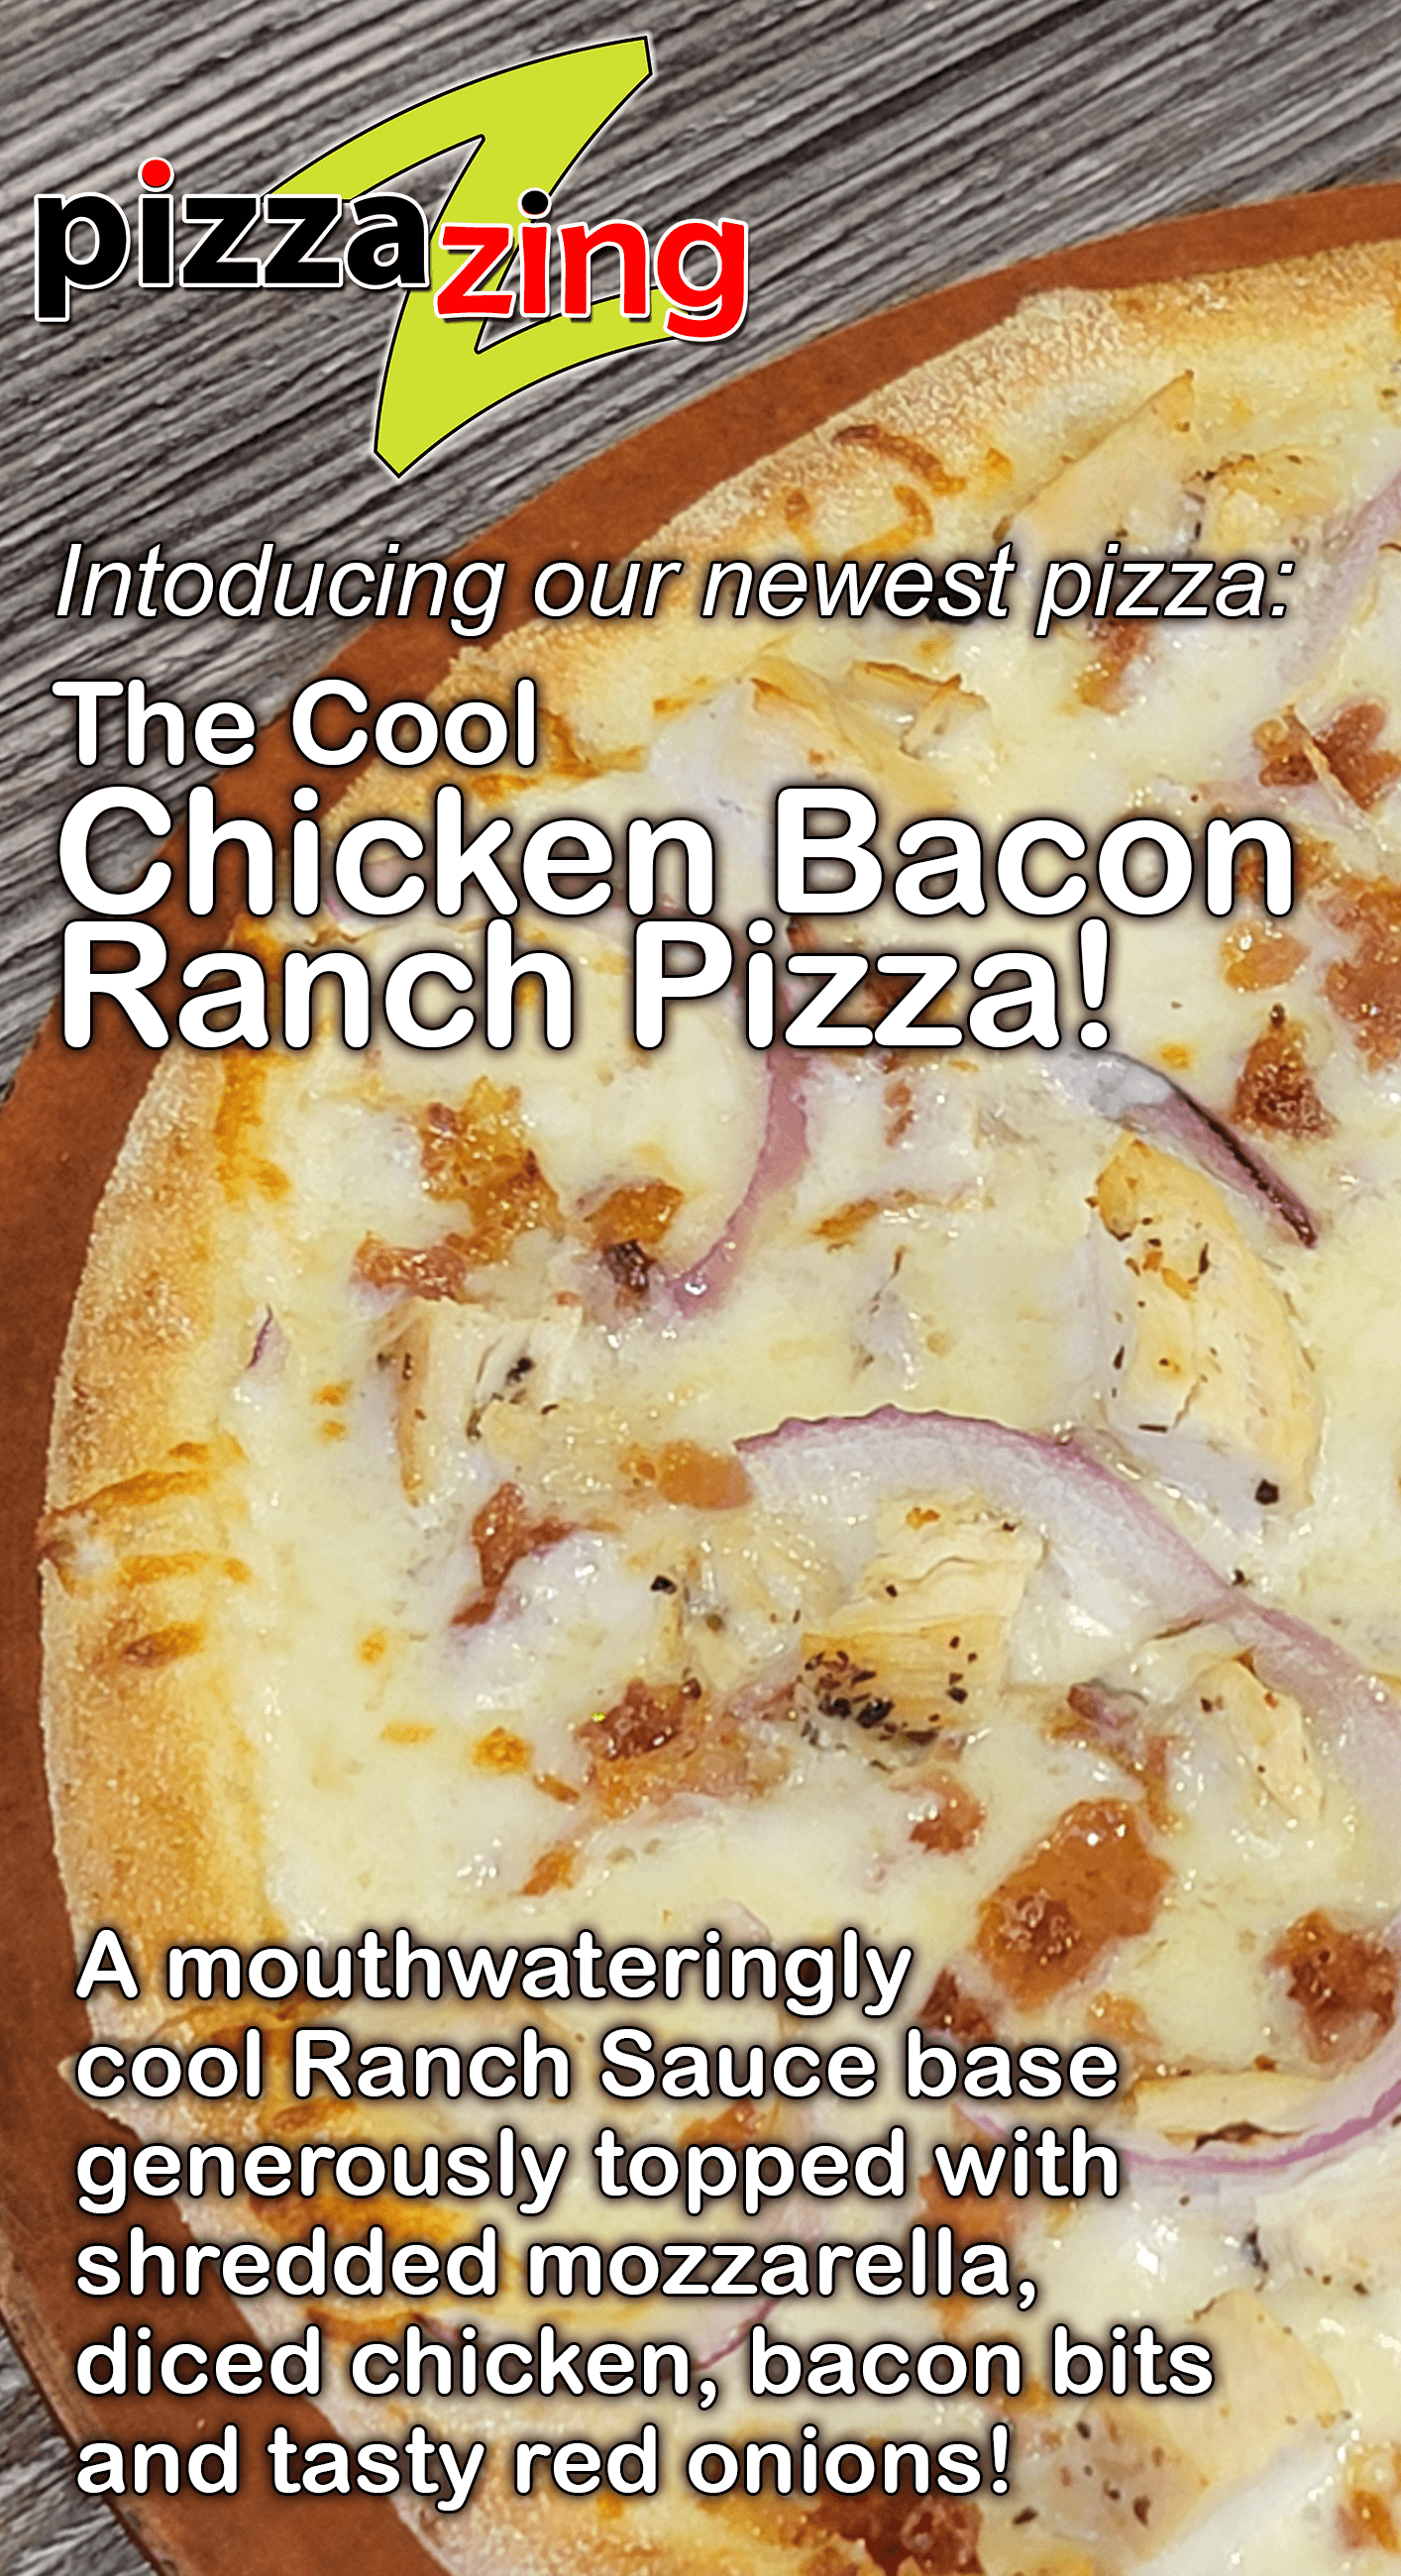 A mouthwateringly cool Ranch Sauce base that is generously topped with shredded mozzarella cheese, diced chicken, bacon bits, and tasty red onions!